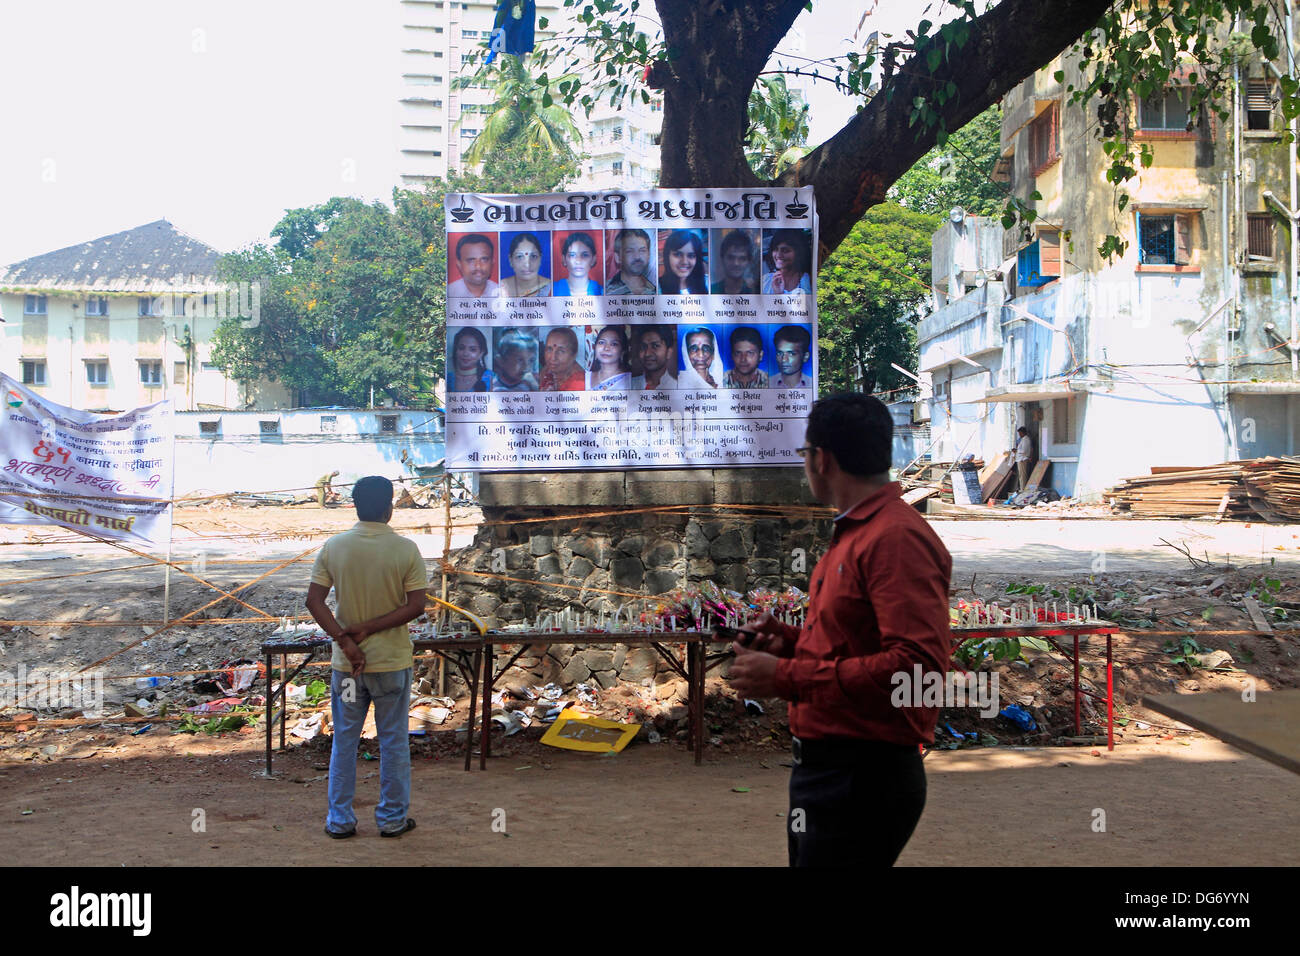 Mumbai, Maharashtra, India. 3rd Oct, 2013. A passerby reads a placard paying homage to those killed in the recent building Collapse on 27th Sept. at Dockyard road killing 61 people. There has been a series of deadly building collapses in Mumbai in 2013 that have brought into sharp focus the city's problems with dangerous and illegal buildings that often house the poor. Mumbai, the financial capital of India, with an ever-growing population that is currently more than 15 million, has a severe shortage of land and property prices are sky-high, forcing many residents into unsafe buildings. Se Stock Photo